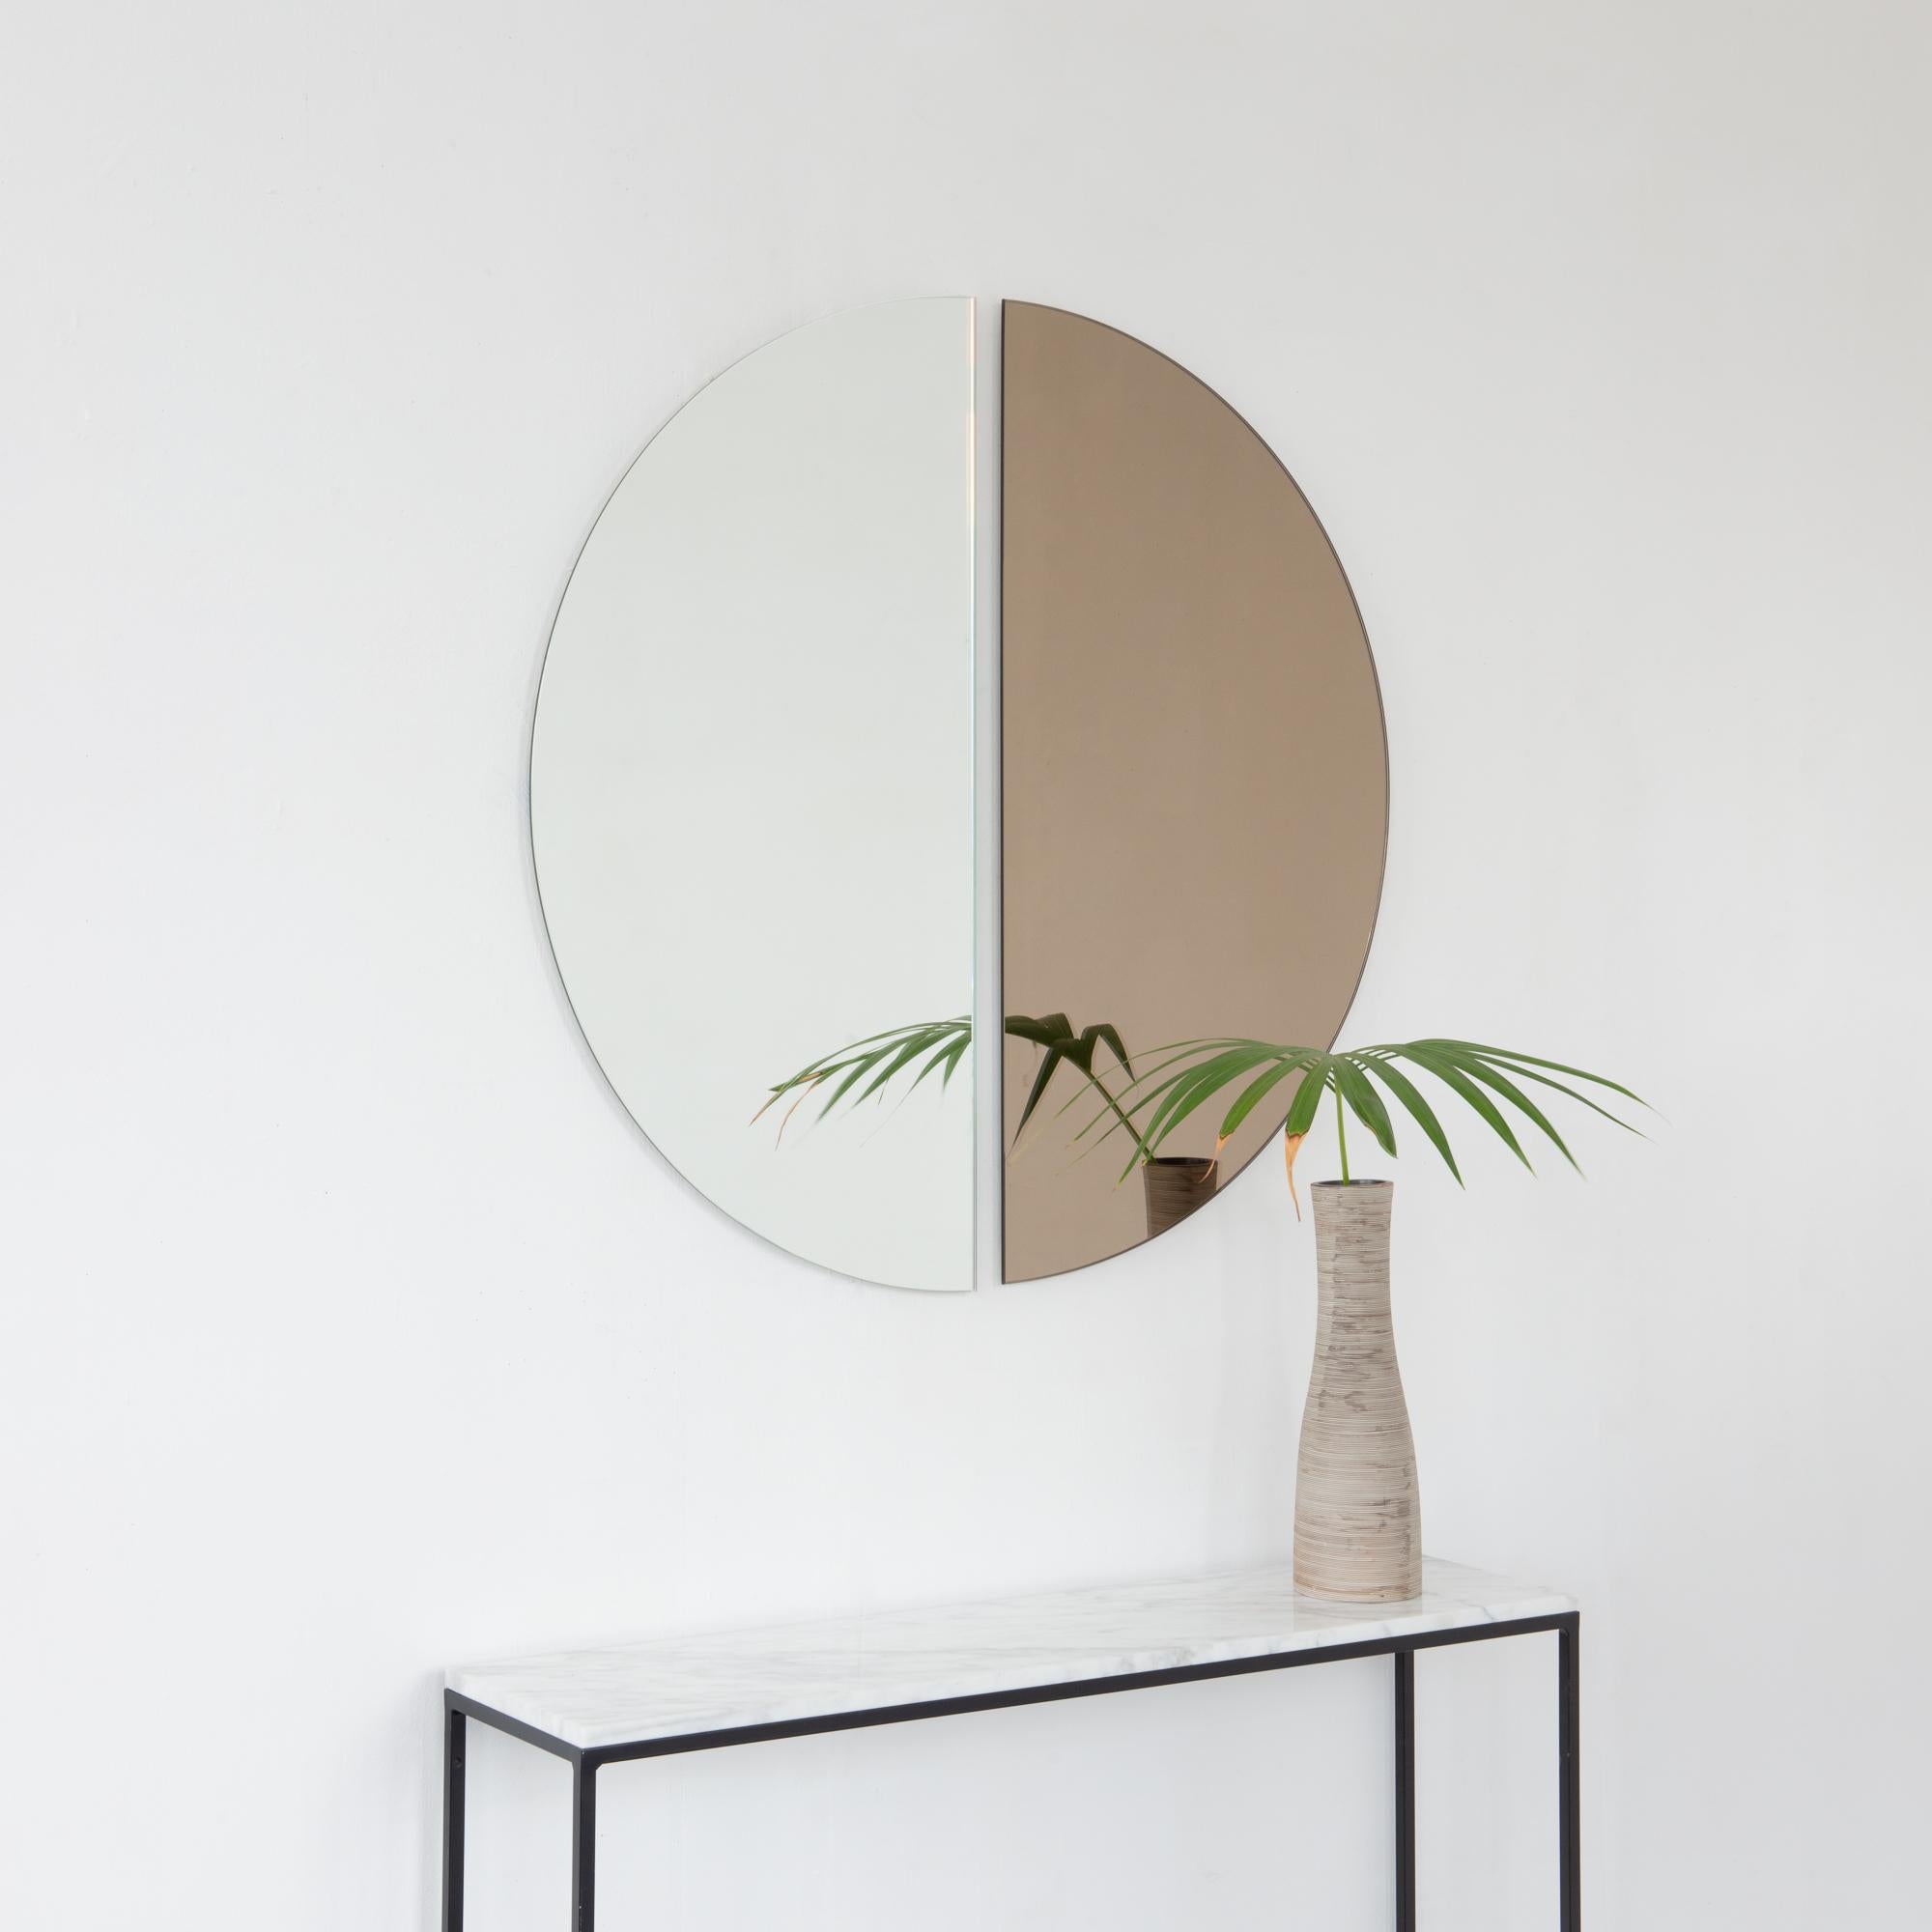 Set of two minimalist half-moon Luna™ standard silver + bronze tinted frameless mirrors with a floating effect. Fitted with a quality hanging system for a flexible installation in 4 different directions. Designed and made in London, UK. 

Our